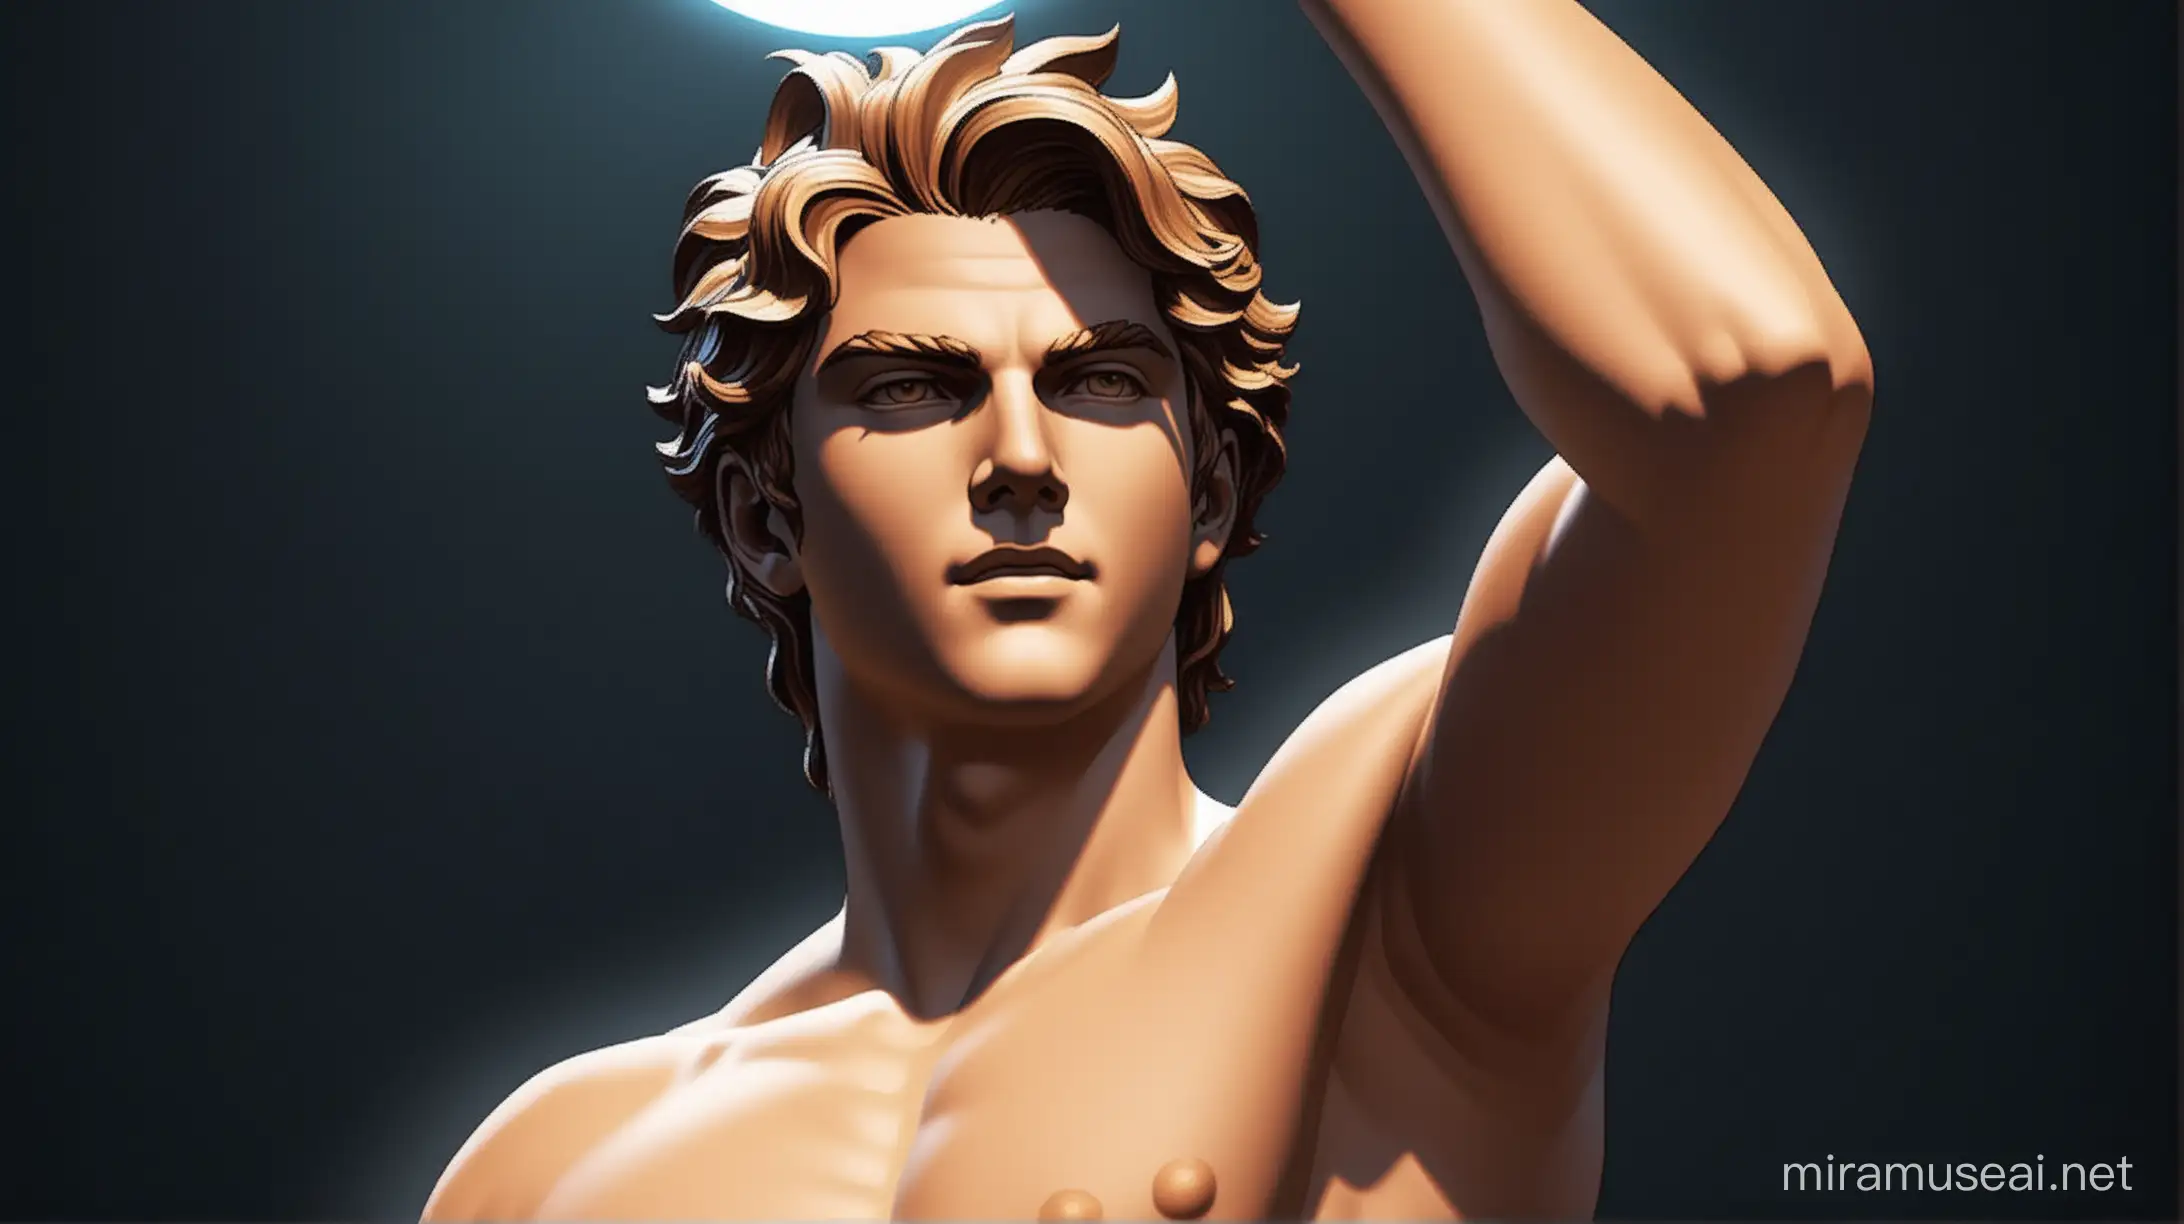  Generate greek god apollo in with dark background picturised as in modern VR game 